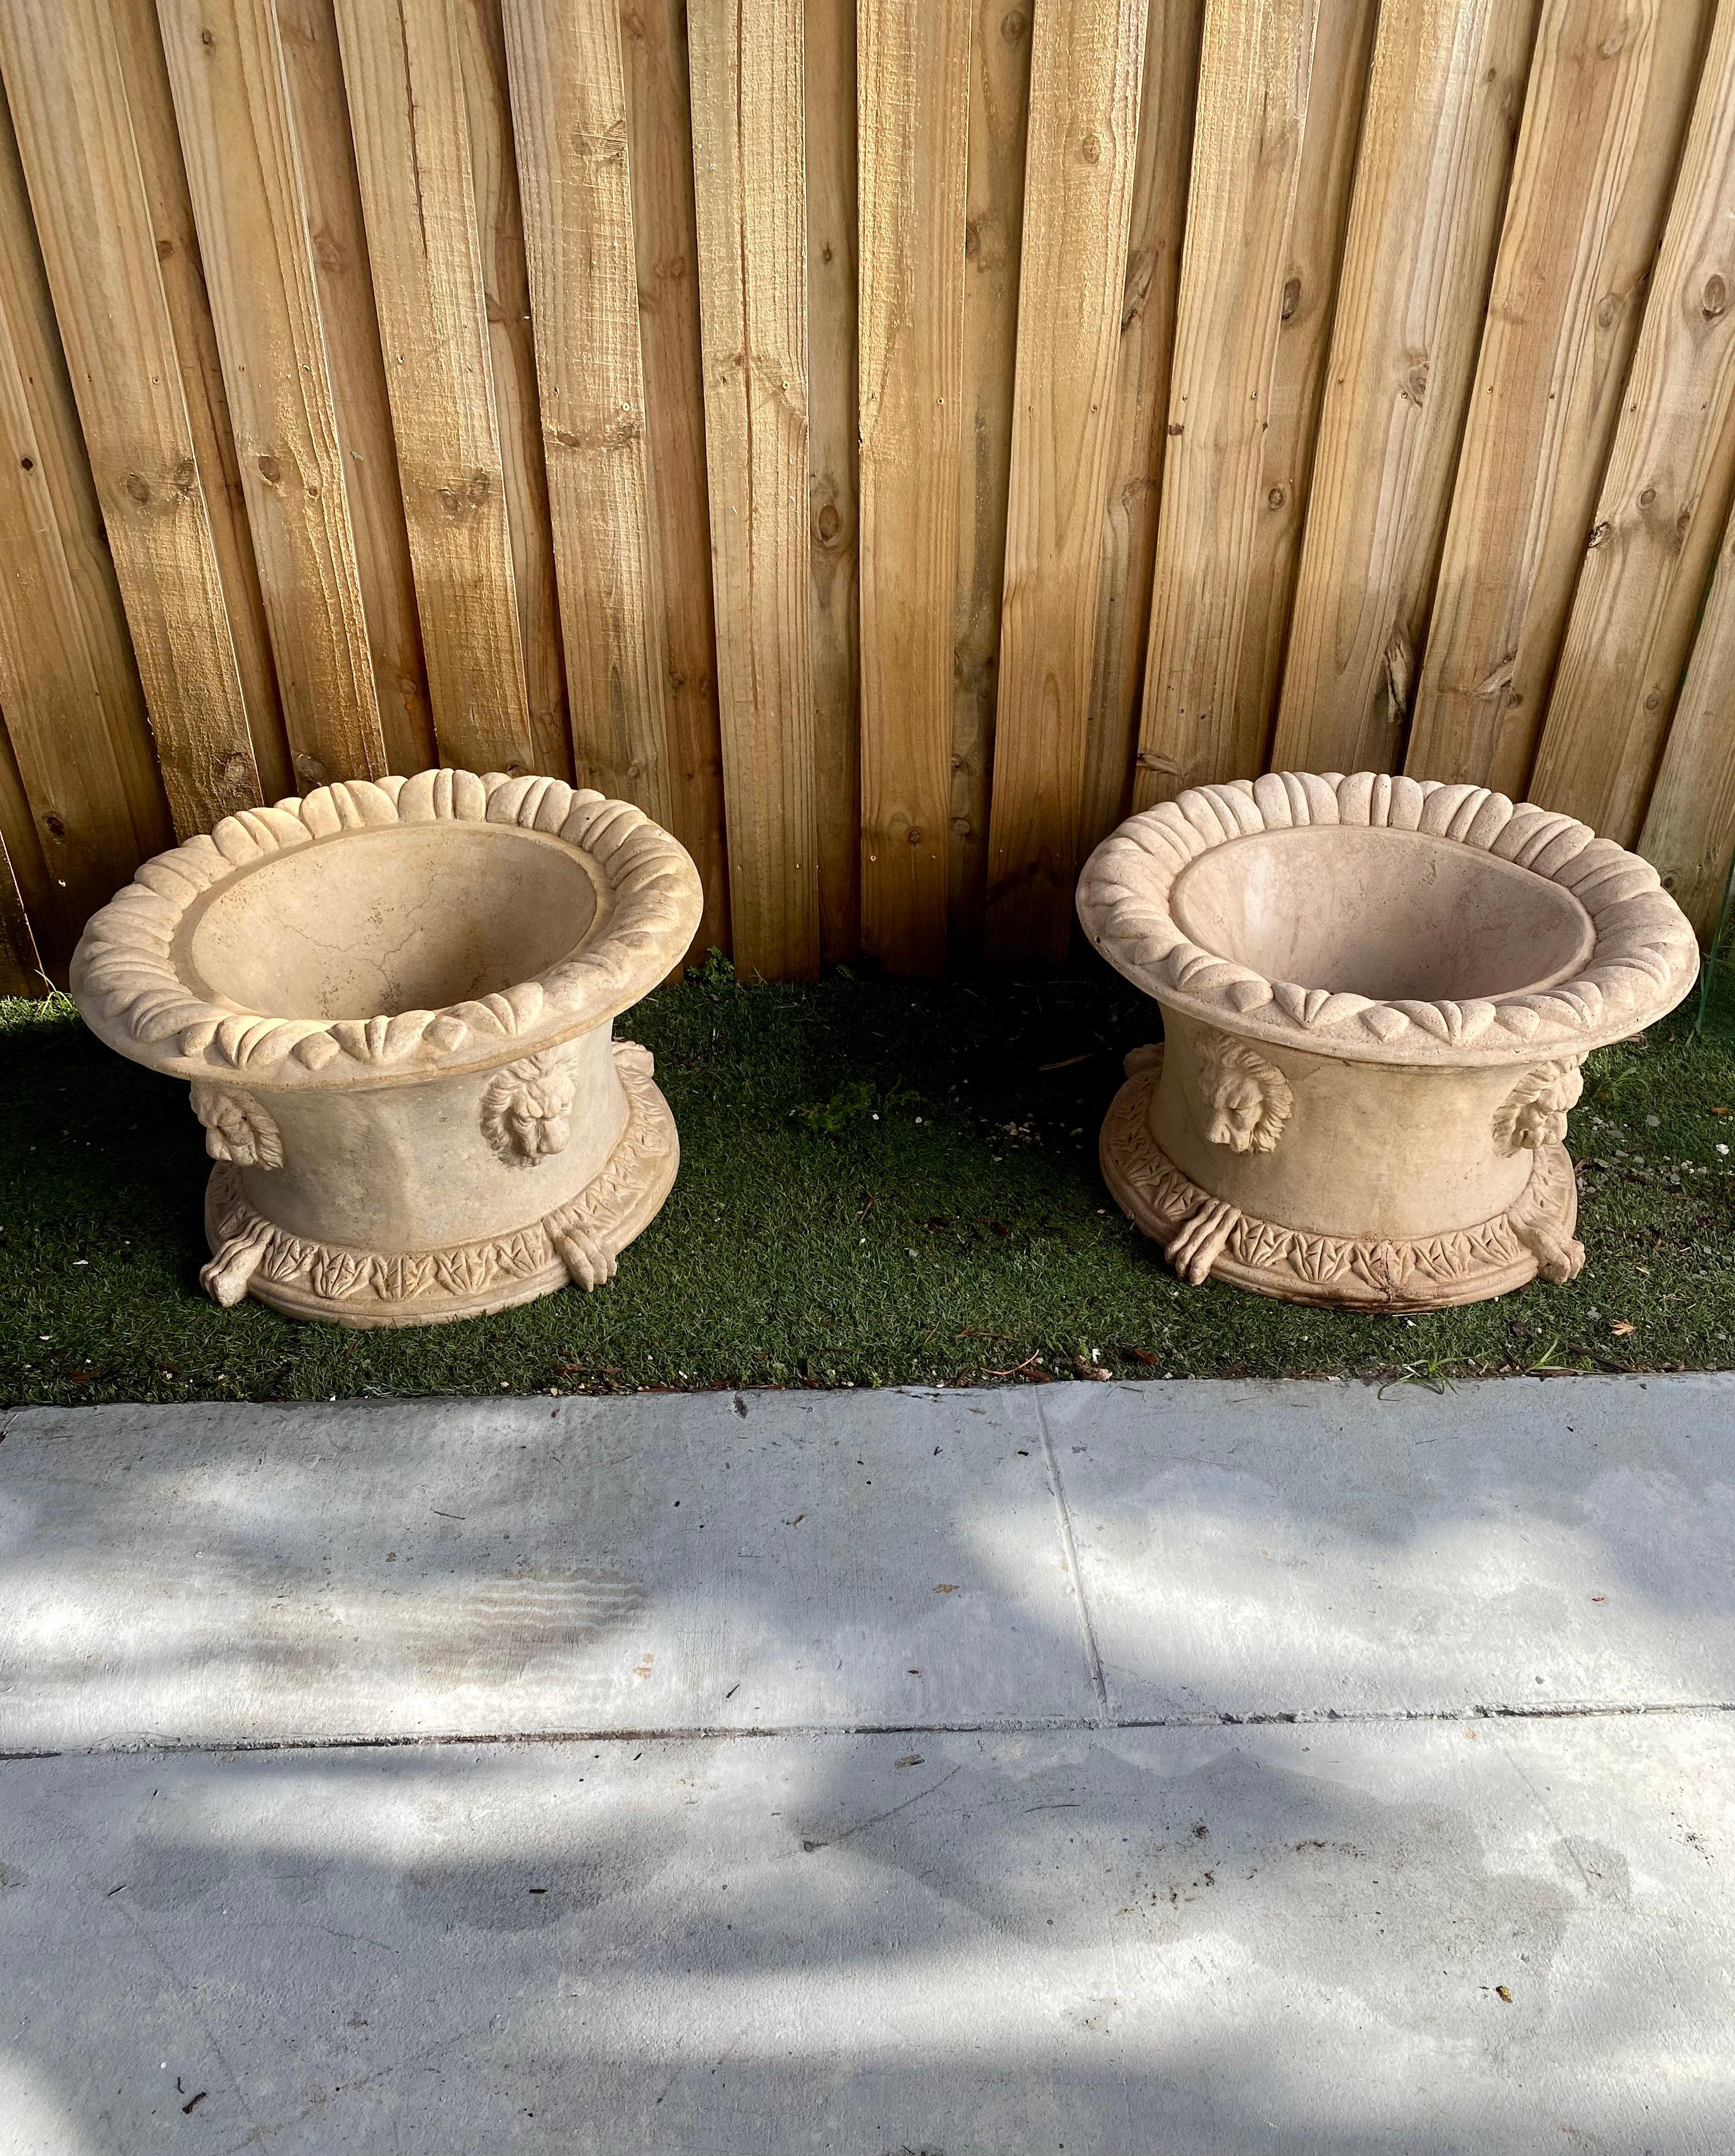 On offer on this occasion is one of the most stunning circular lion planters  you could hope to find. This is an ultra-rare opportunity to acquire what is, unequivocally, the best of the best, it being a most spectacular and beautifully-presented